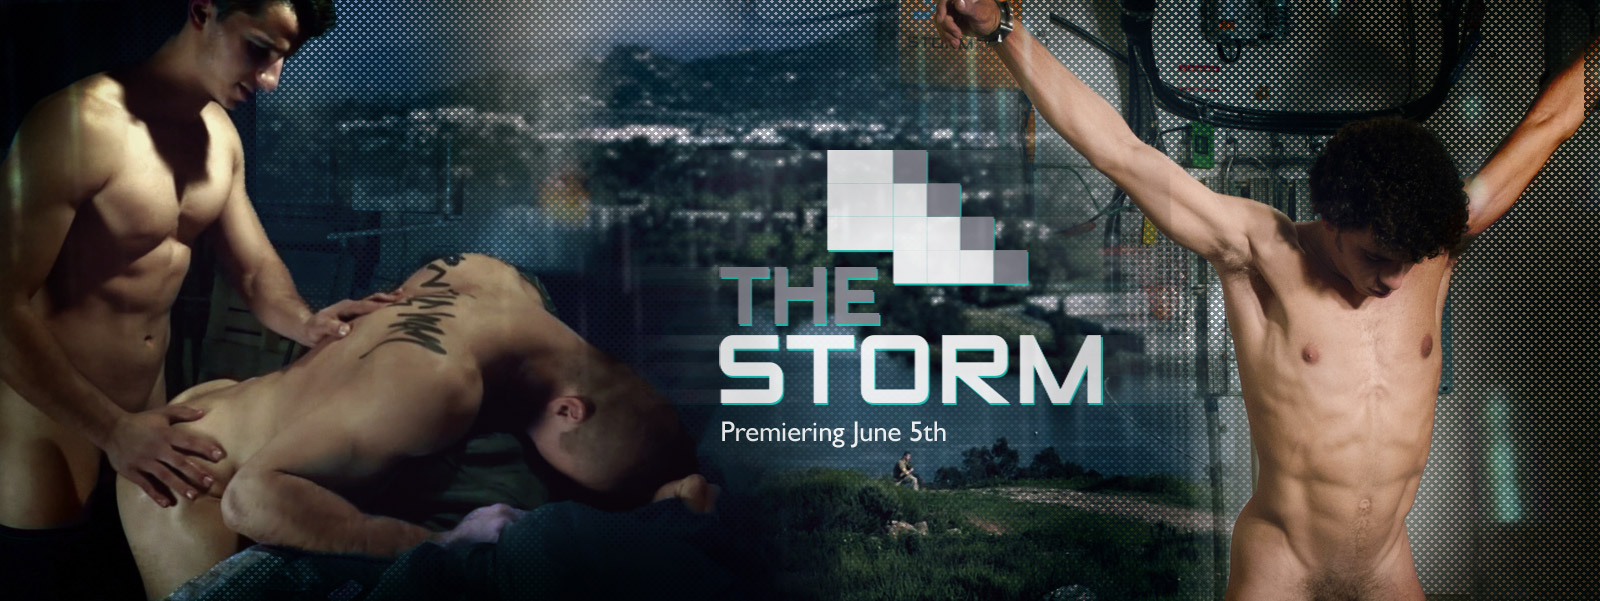 The Storm - Trailer